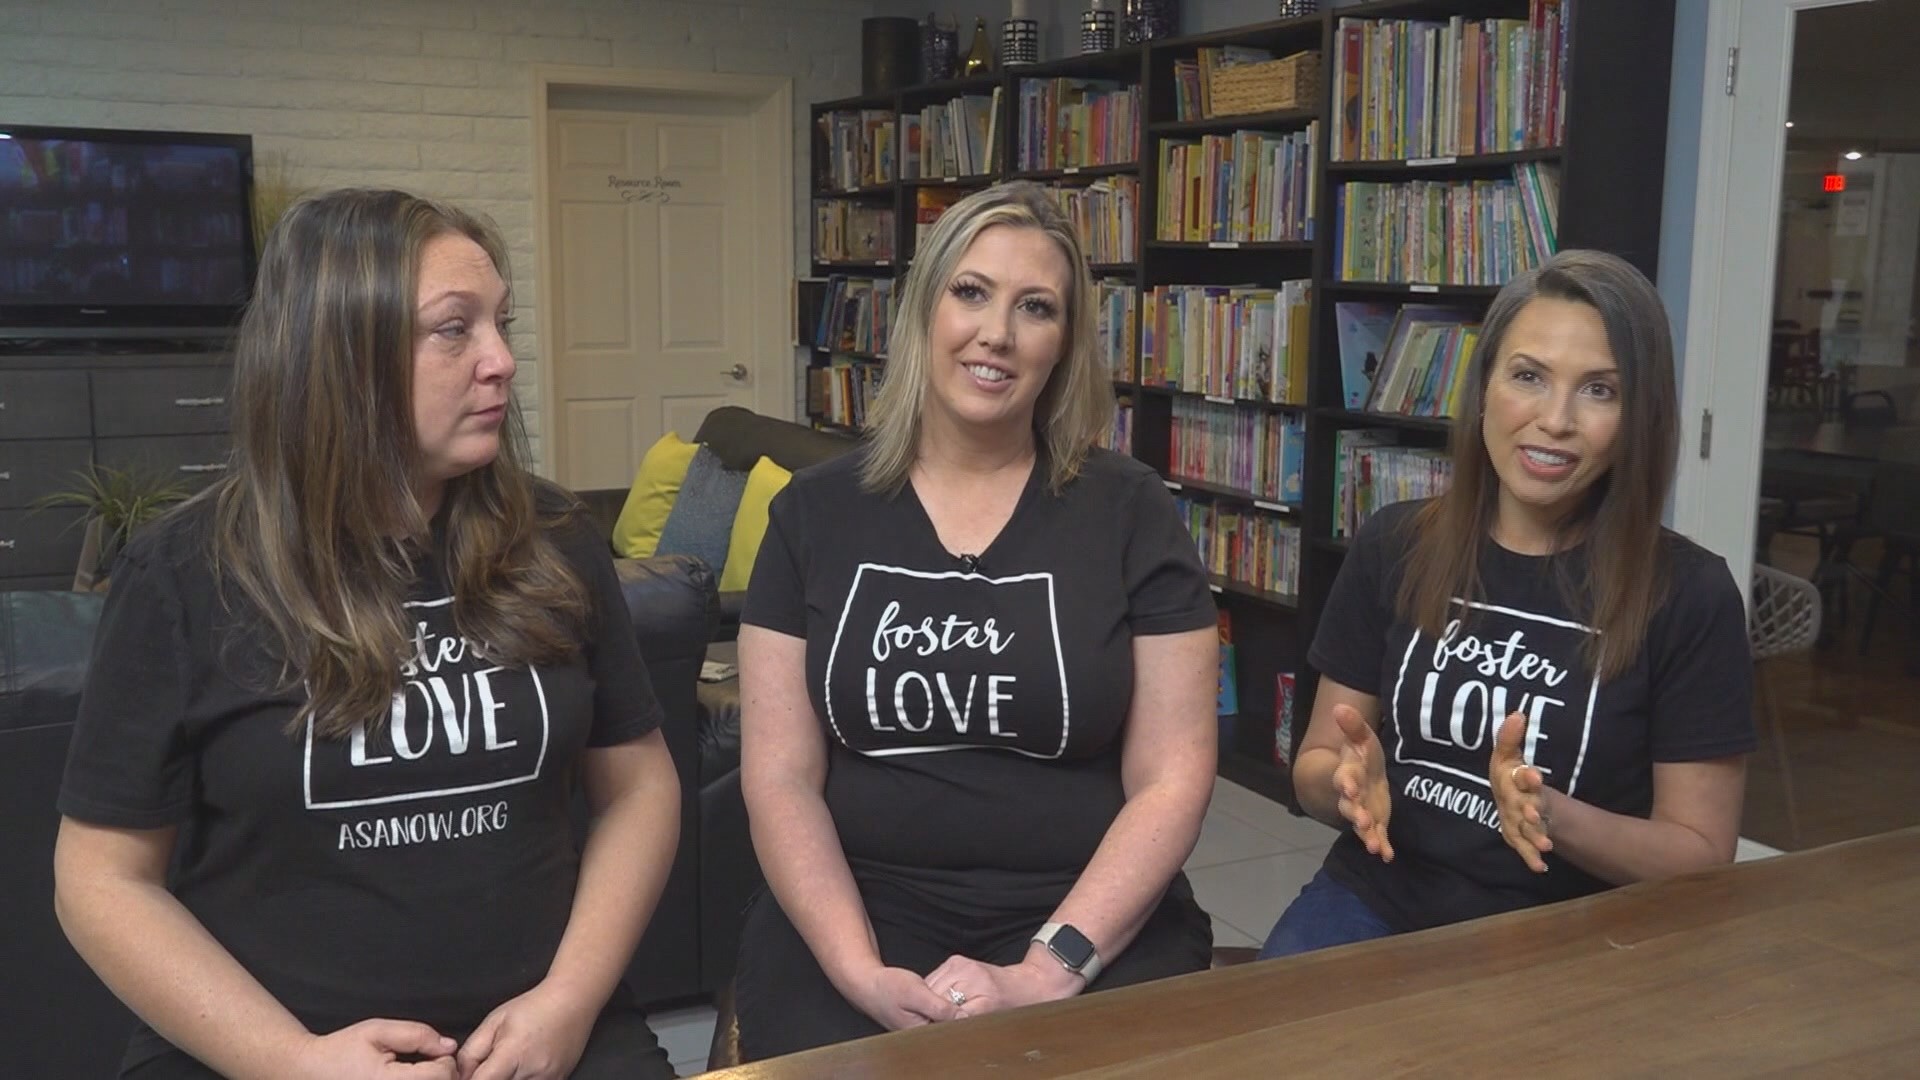 3 foster moms started a school for their kids in 2020 and now you can help them expand to serve 100 kids at a new building. Watch the video to find out how.